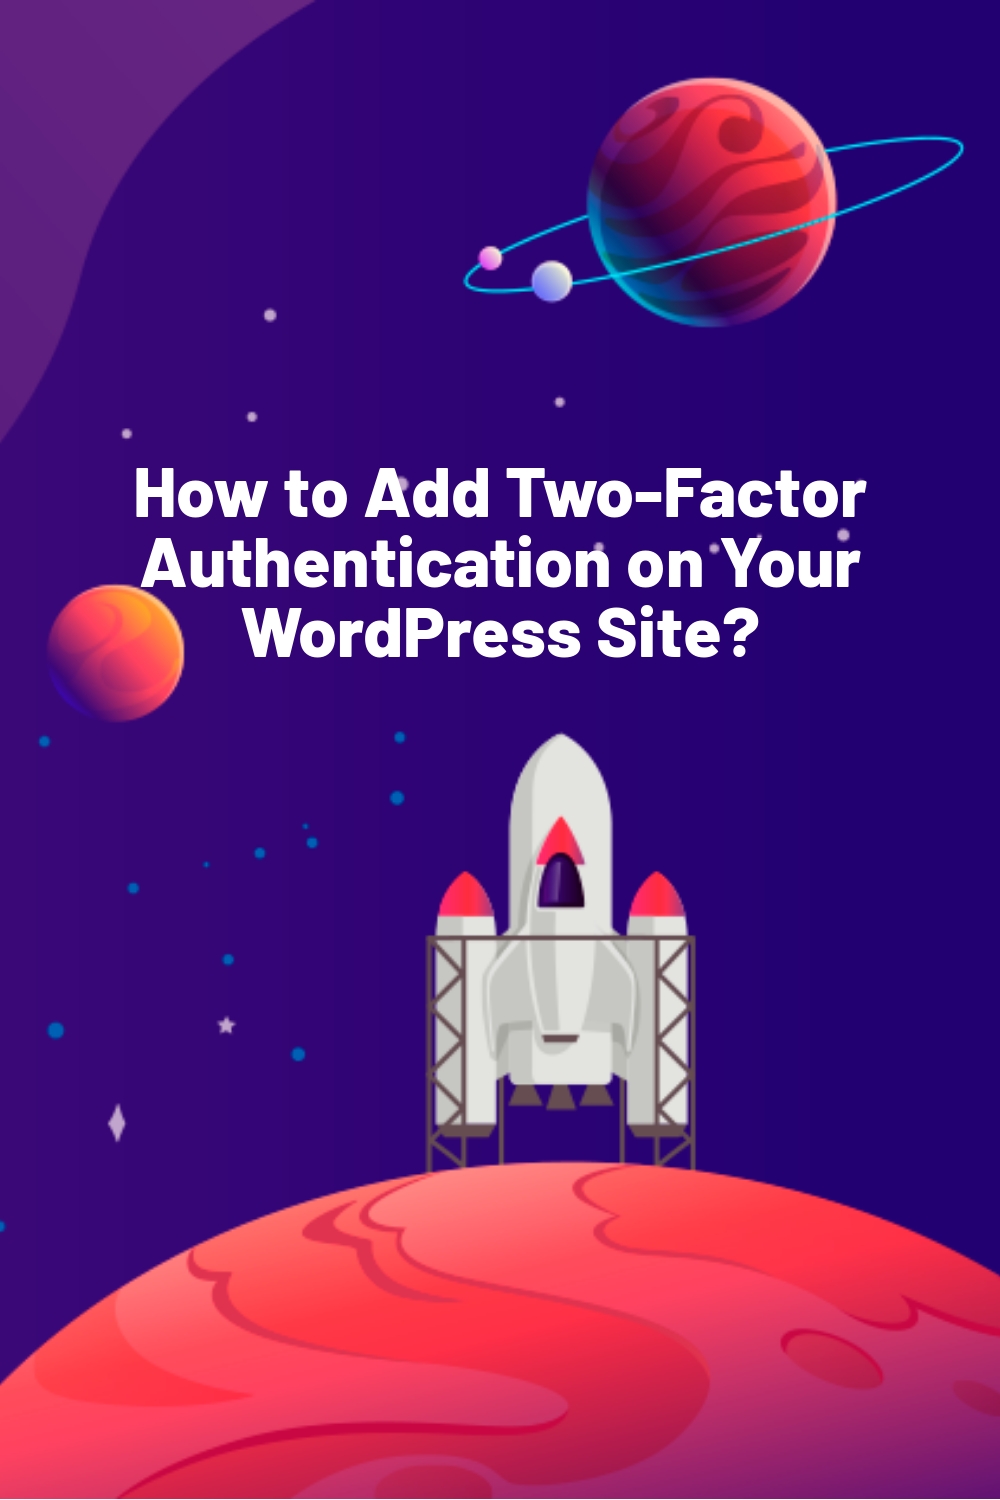 How to Add Two-Factor Authentication on Your WordPress Site?